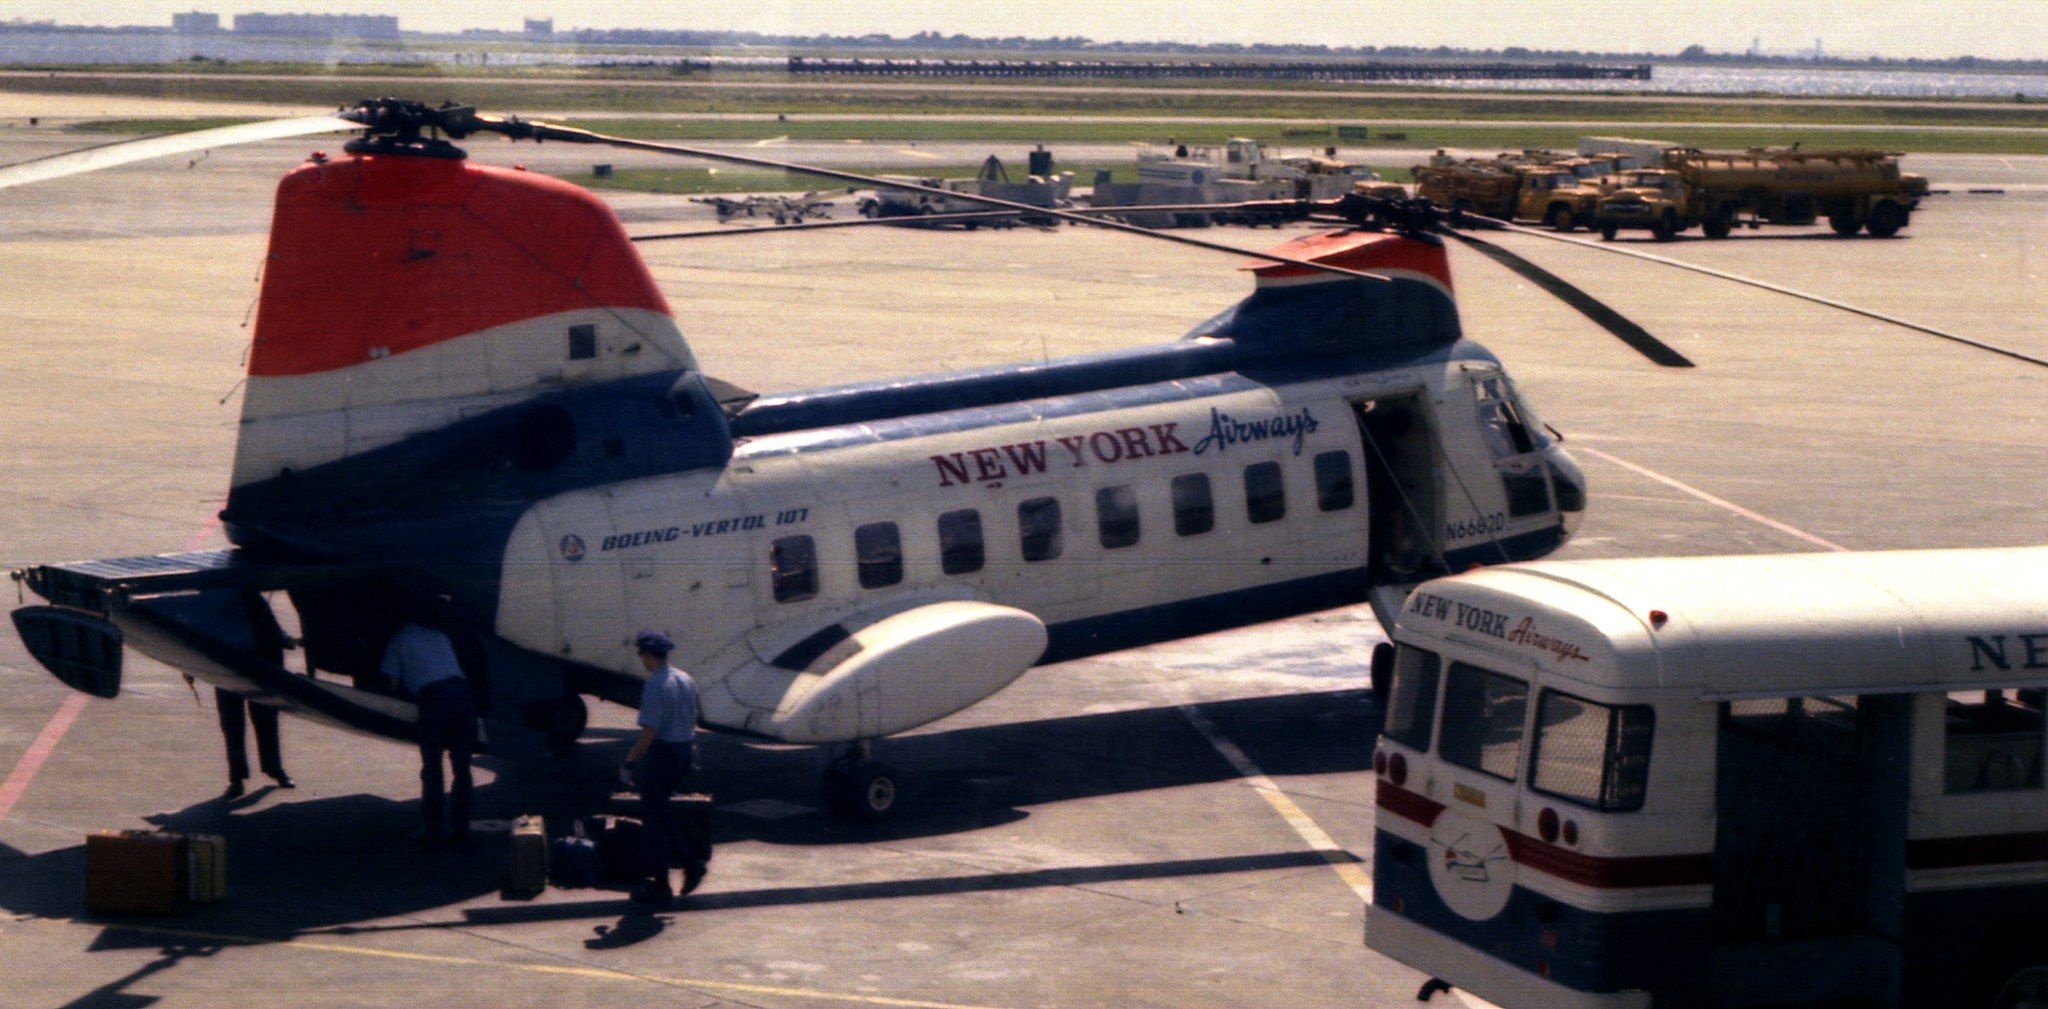 Ground crew members load cargo onto a New York Airways-branded helicopter